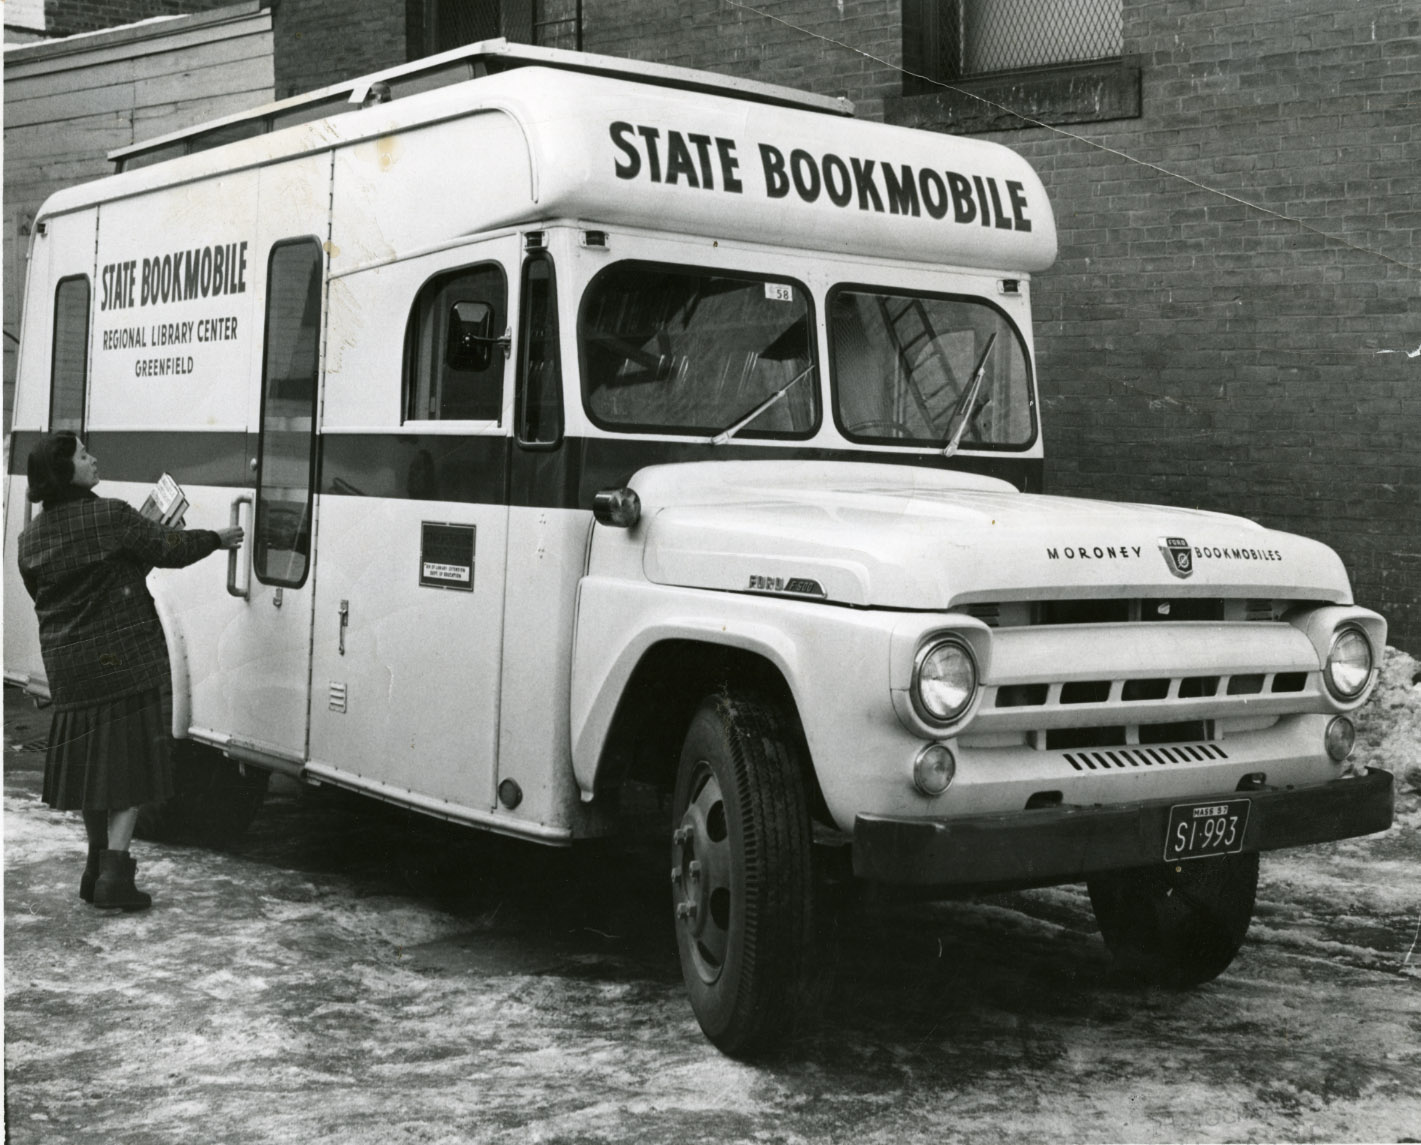 Depiction of Bookmobile, 1957